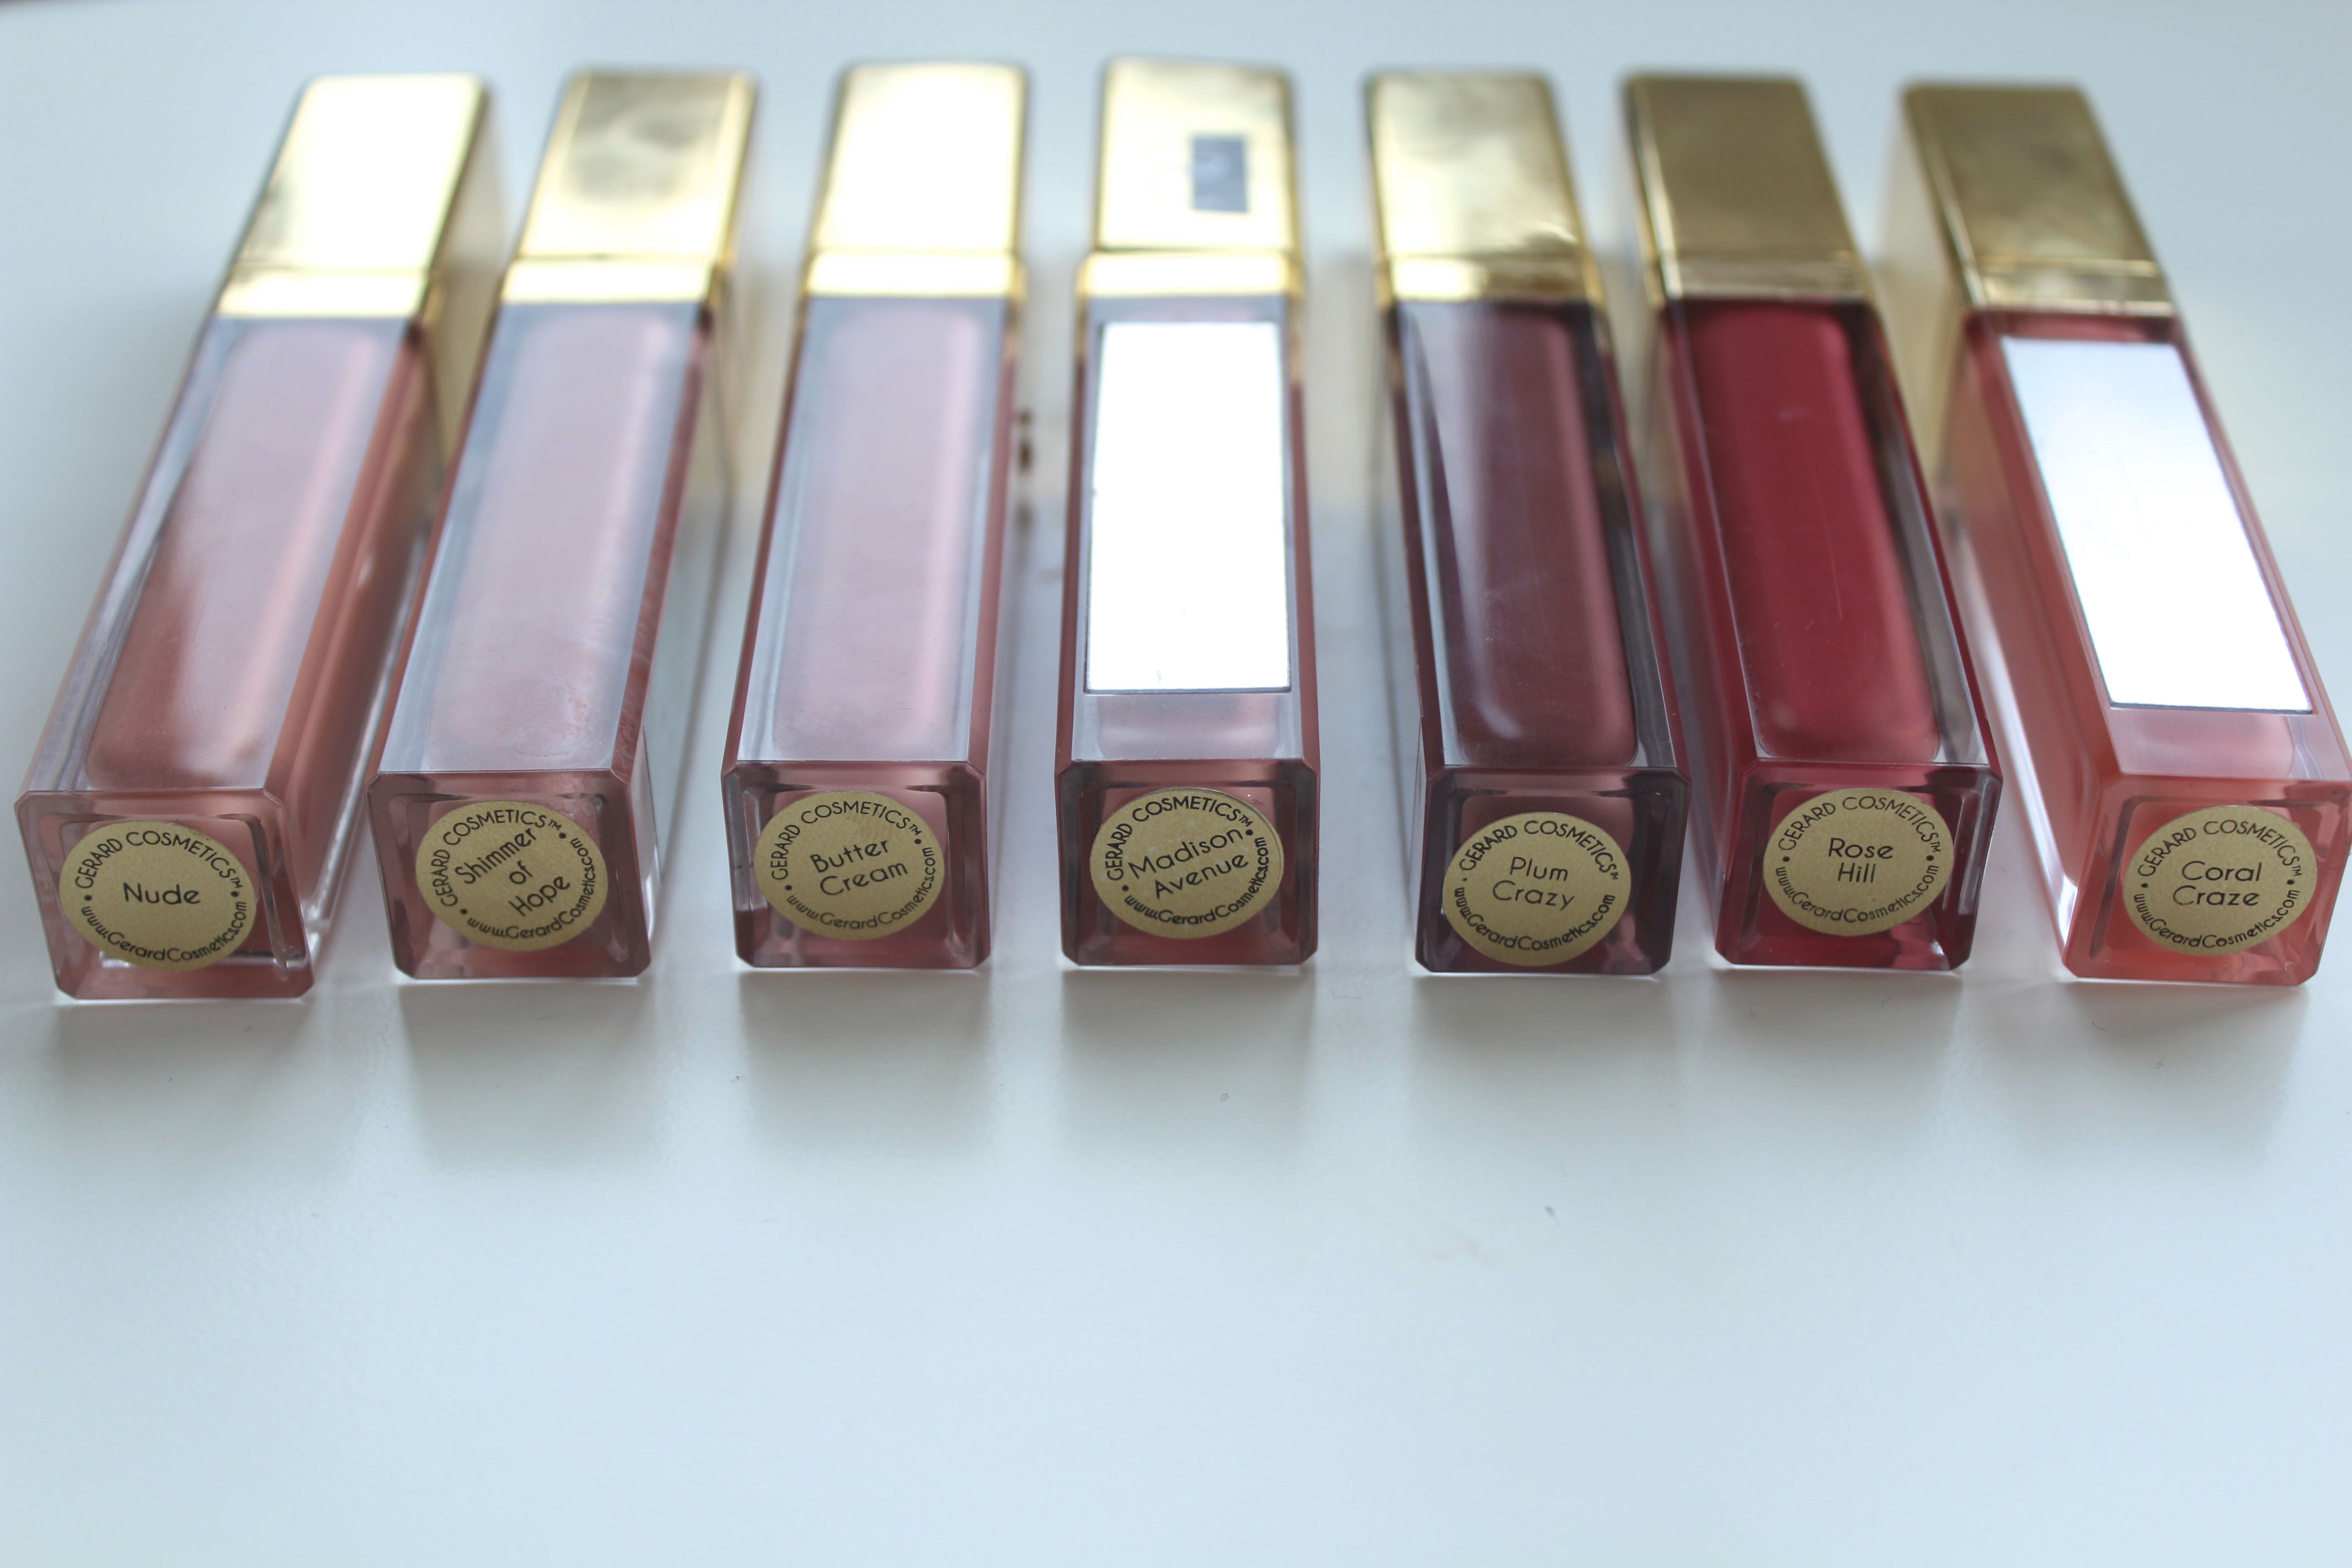 Gerard Cosmetics Lipglosses - Review and Swatches by Face Made Up